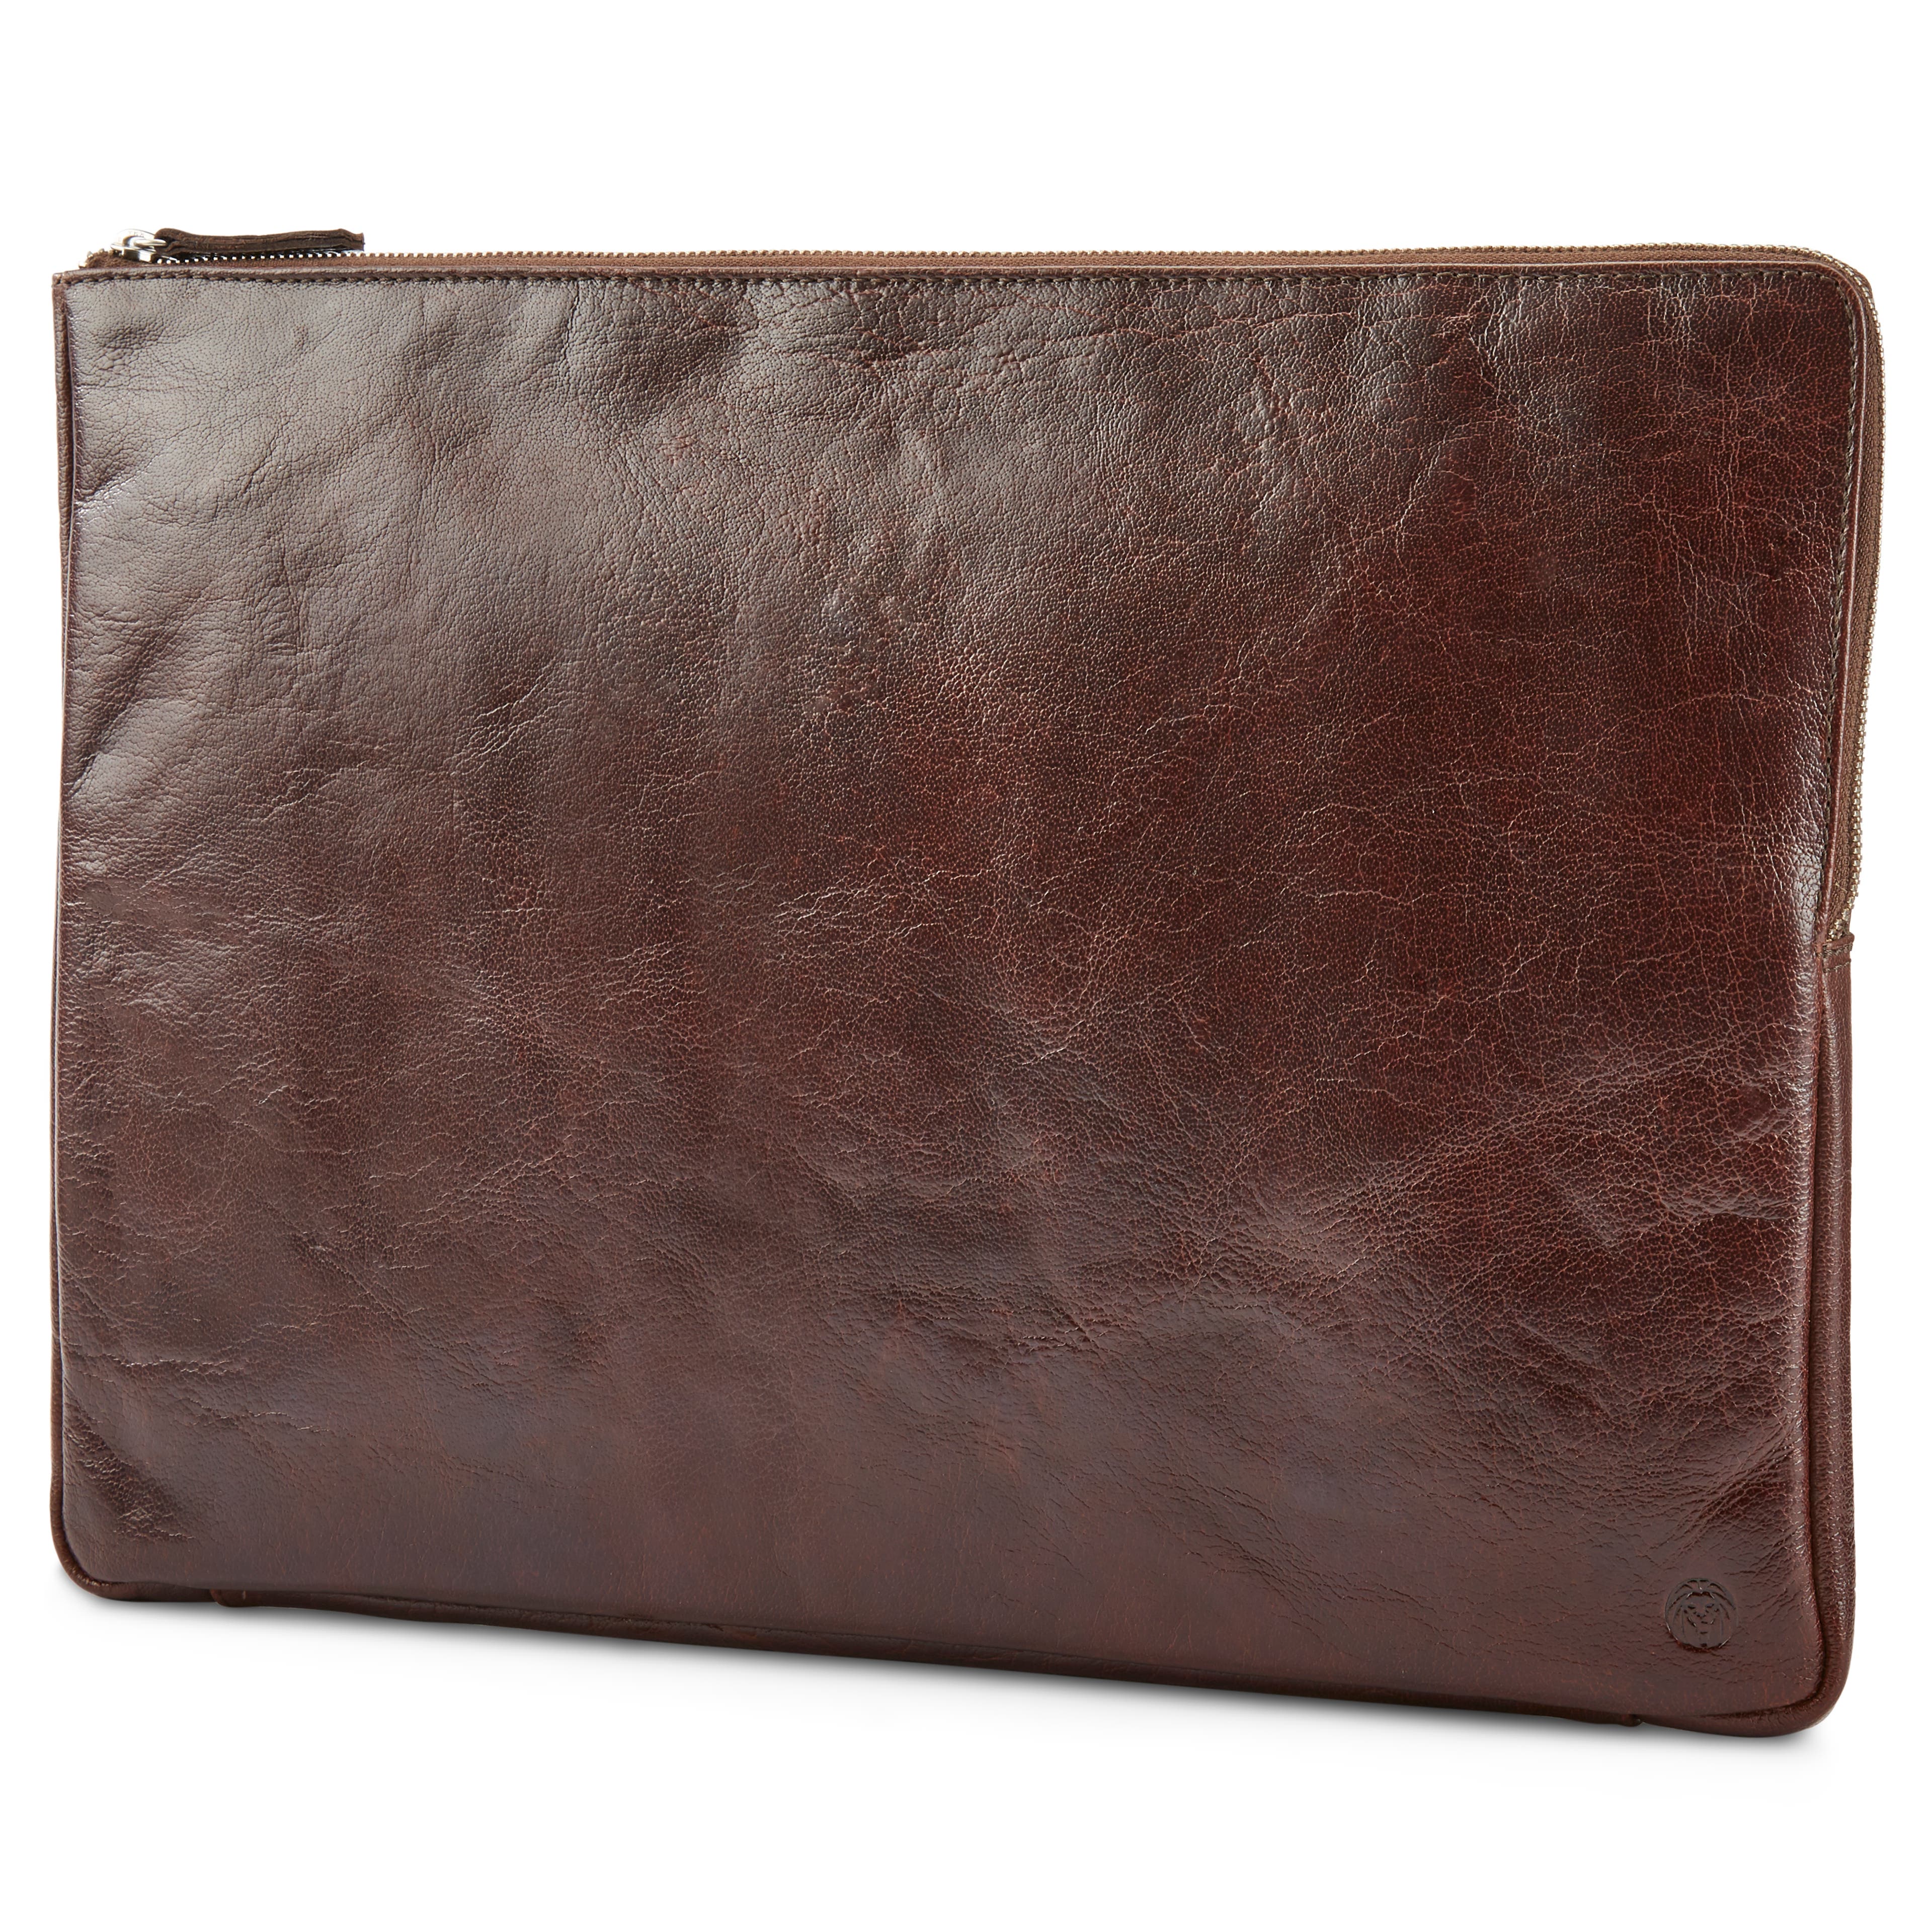 California Brown Leather Laptop Sleeve